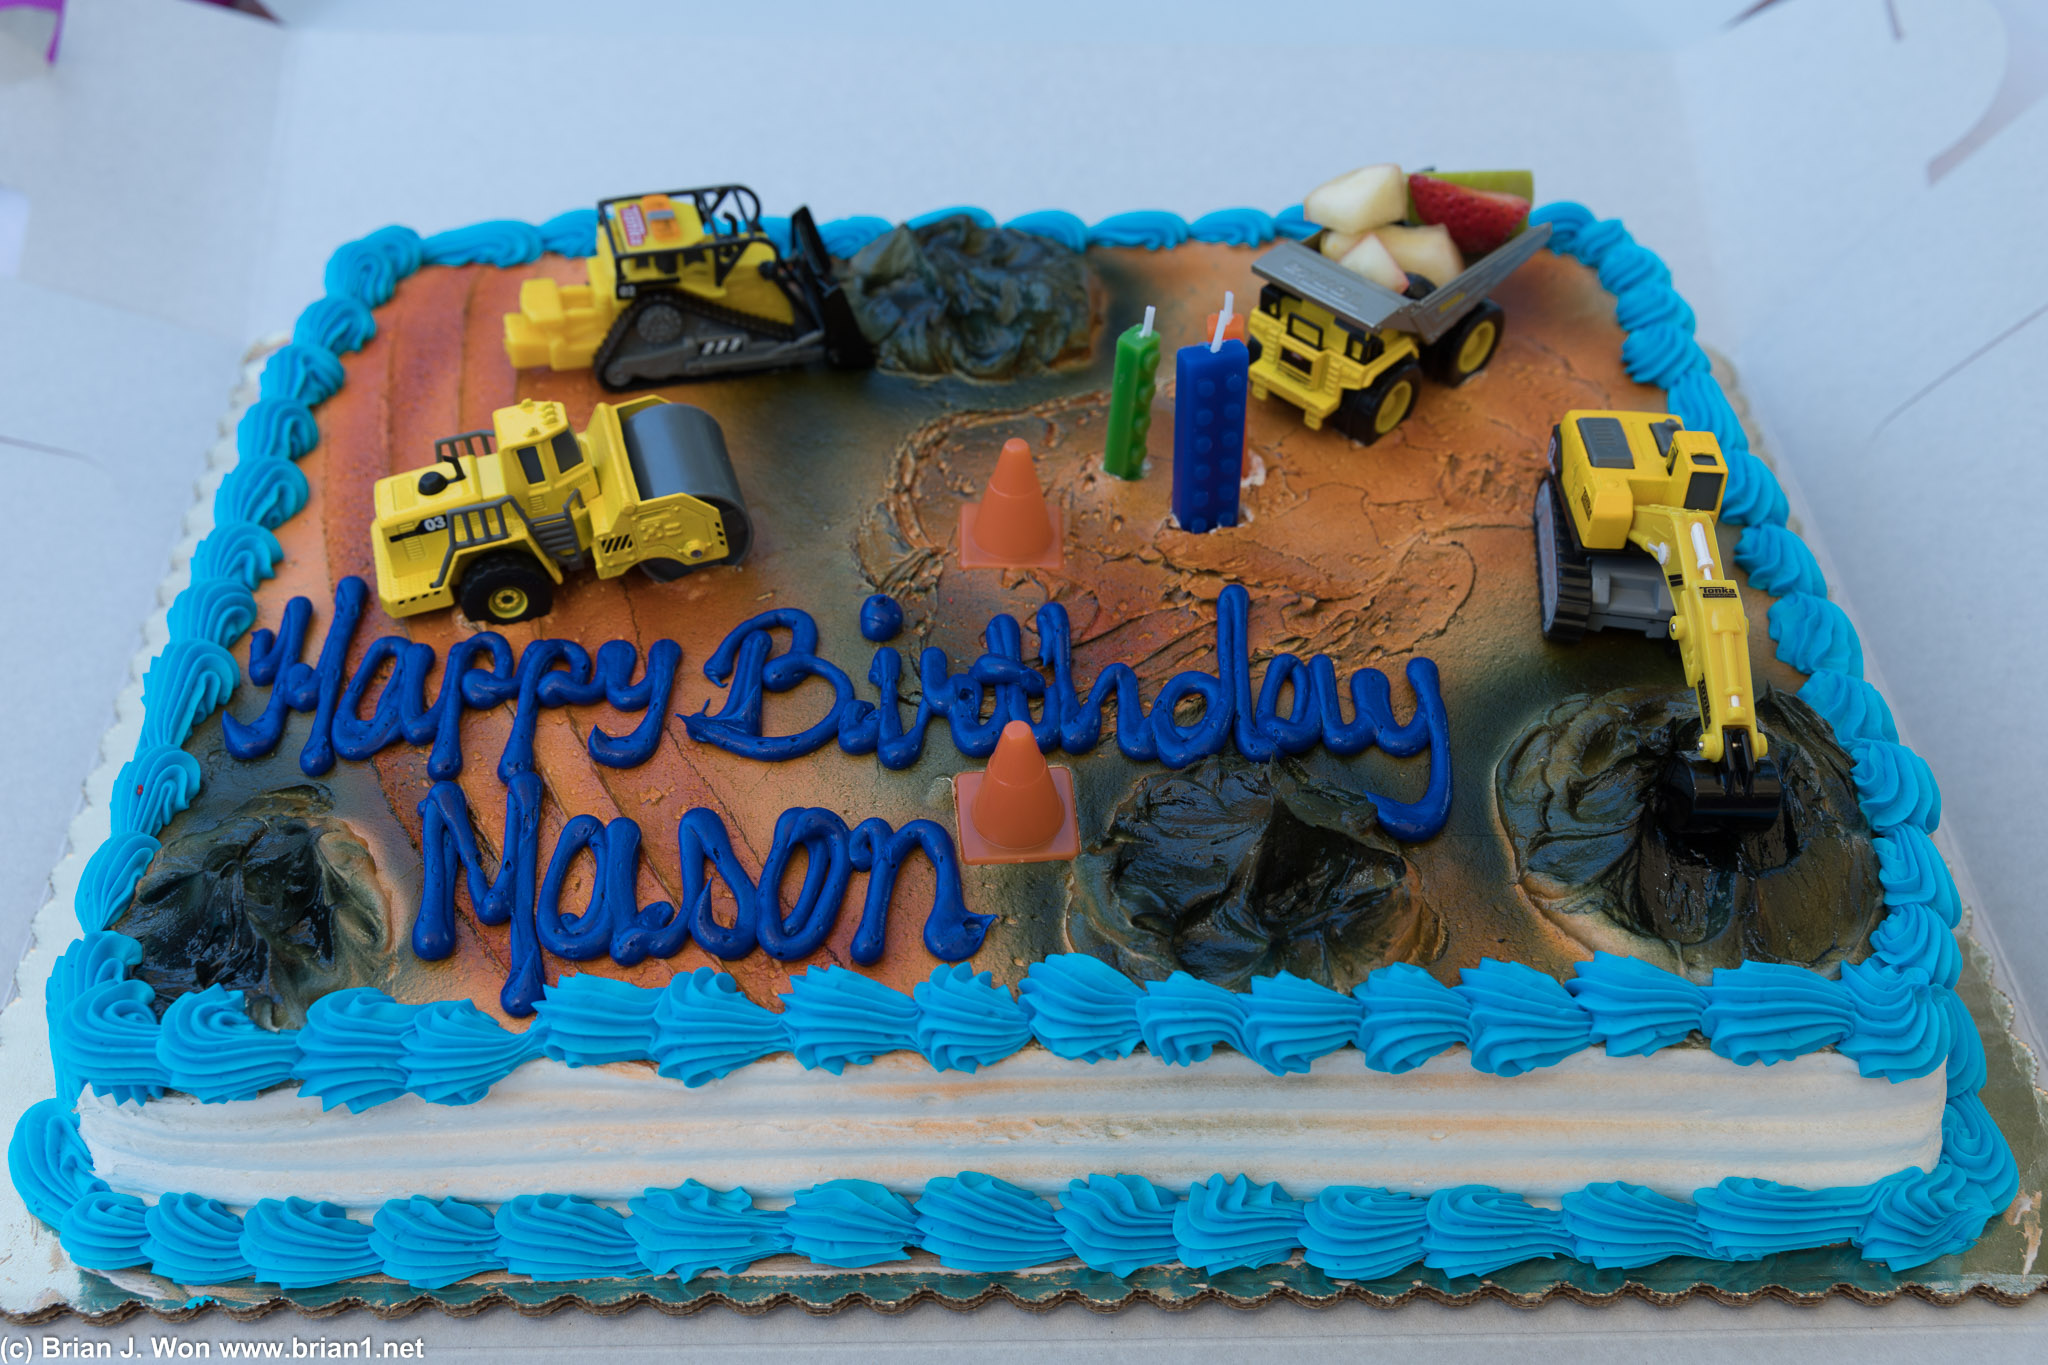 Birthday cake... with lots of construction vehicles!